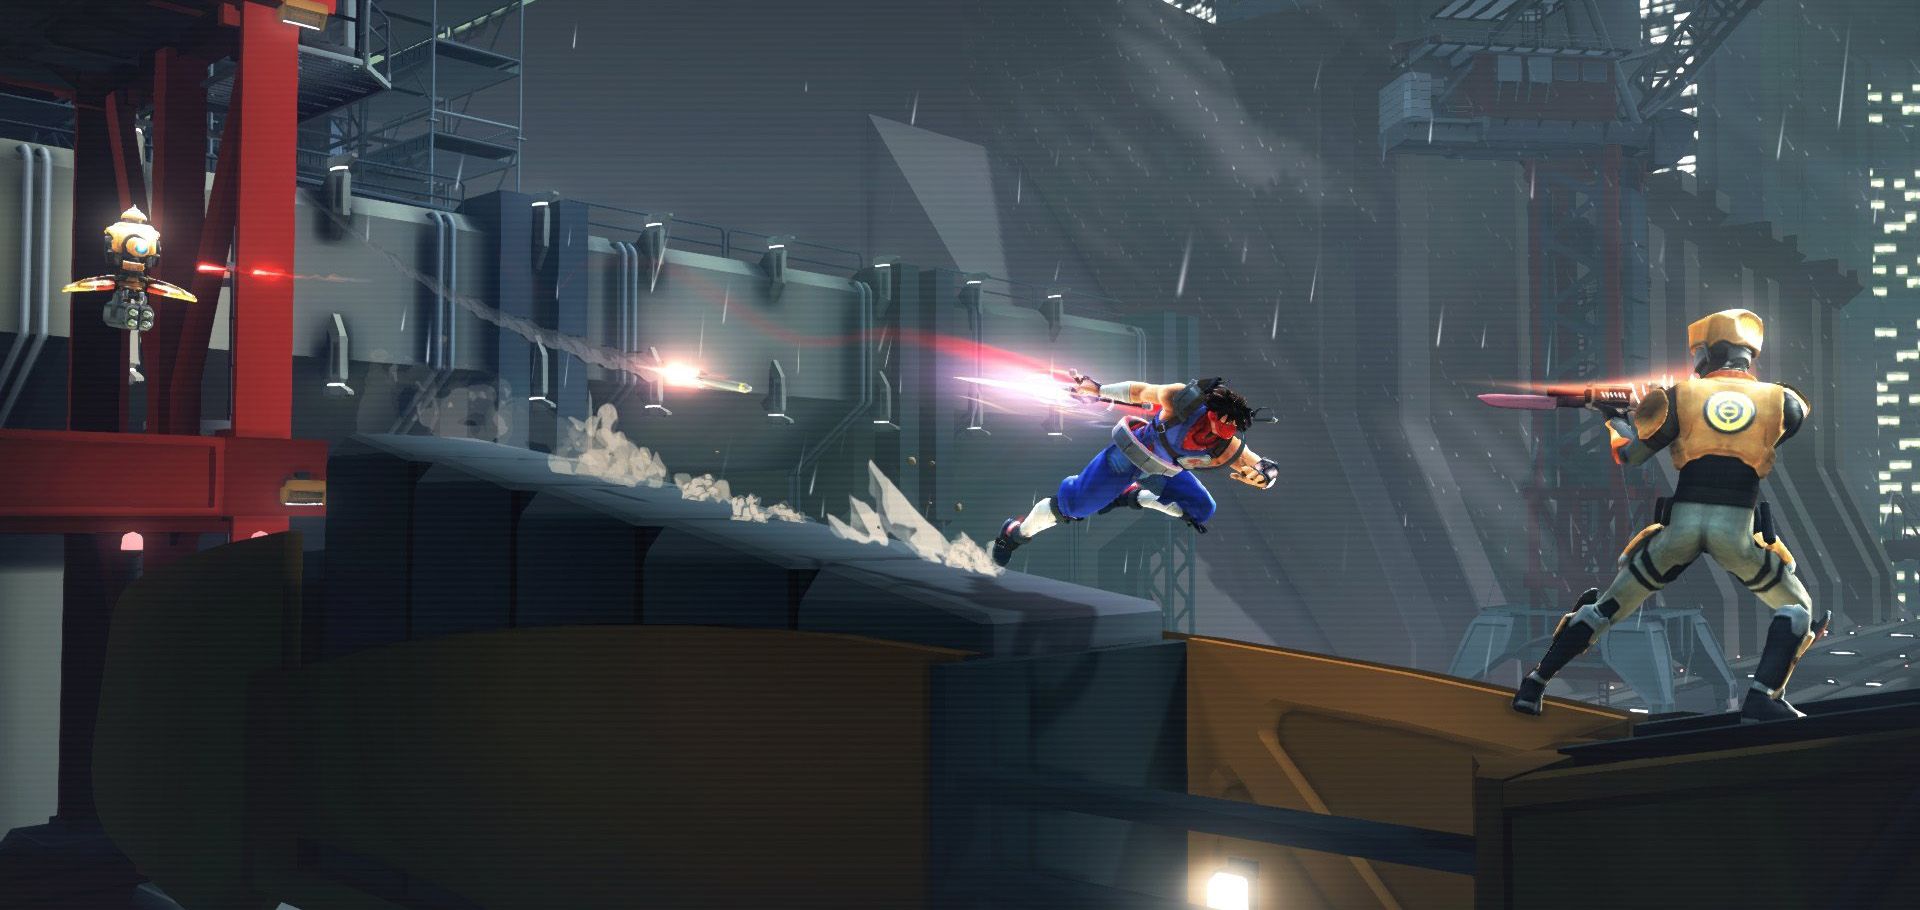 Review: Strider